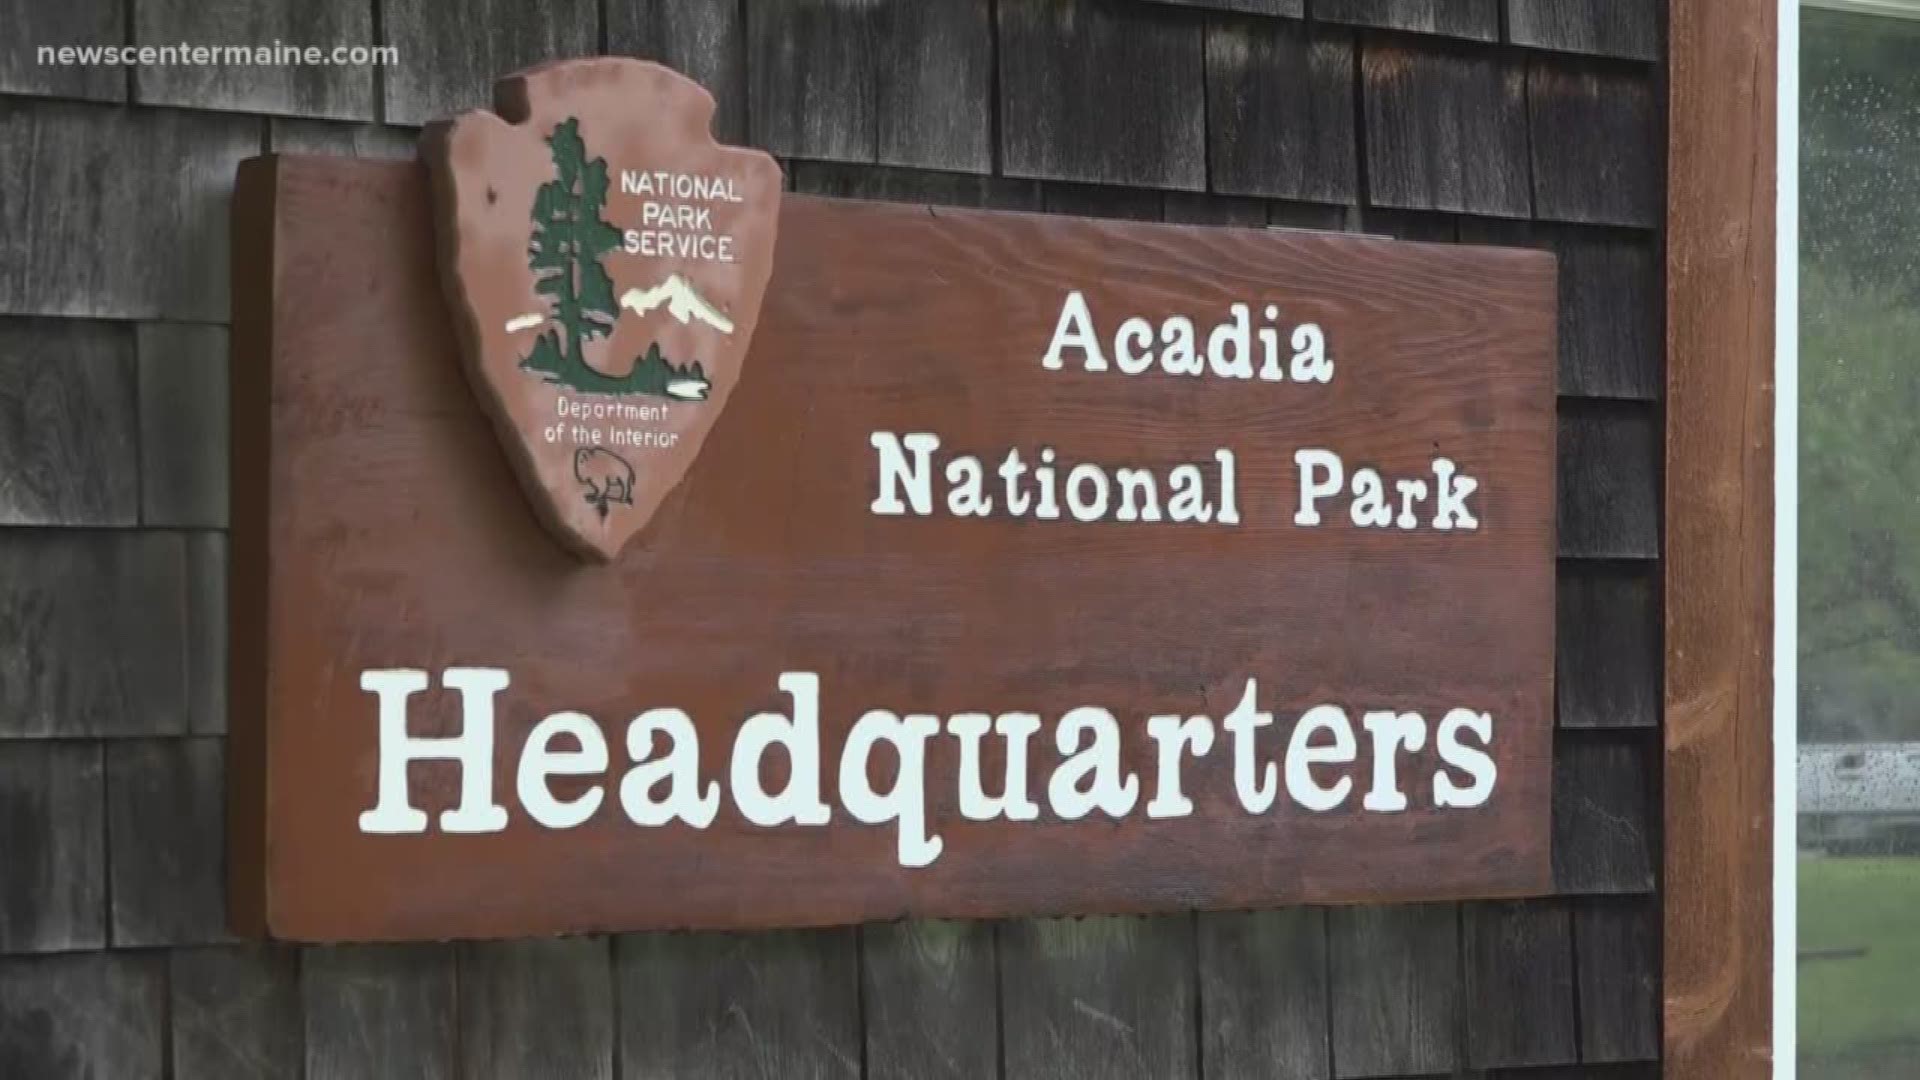 Bad camping etiquette at Acadia National Park is causing safety concerns -- particularly regarding wildfires.